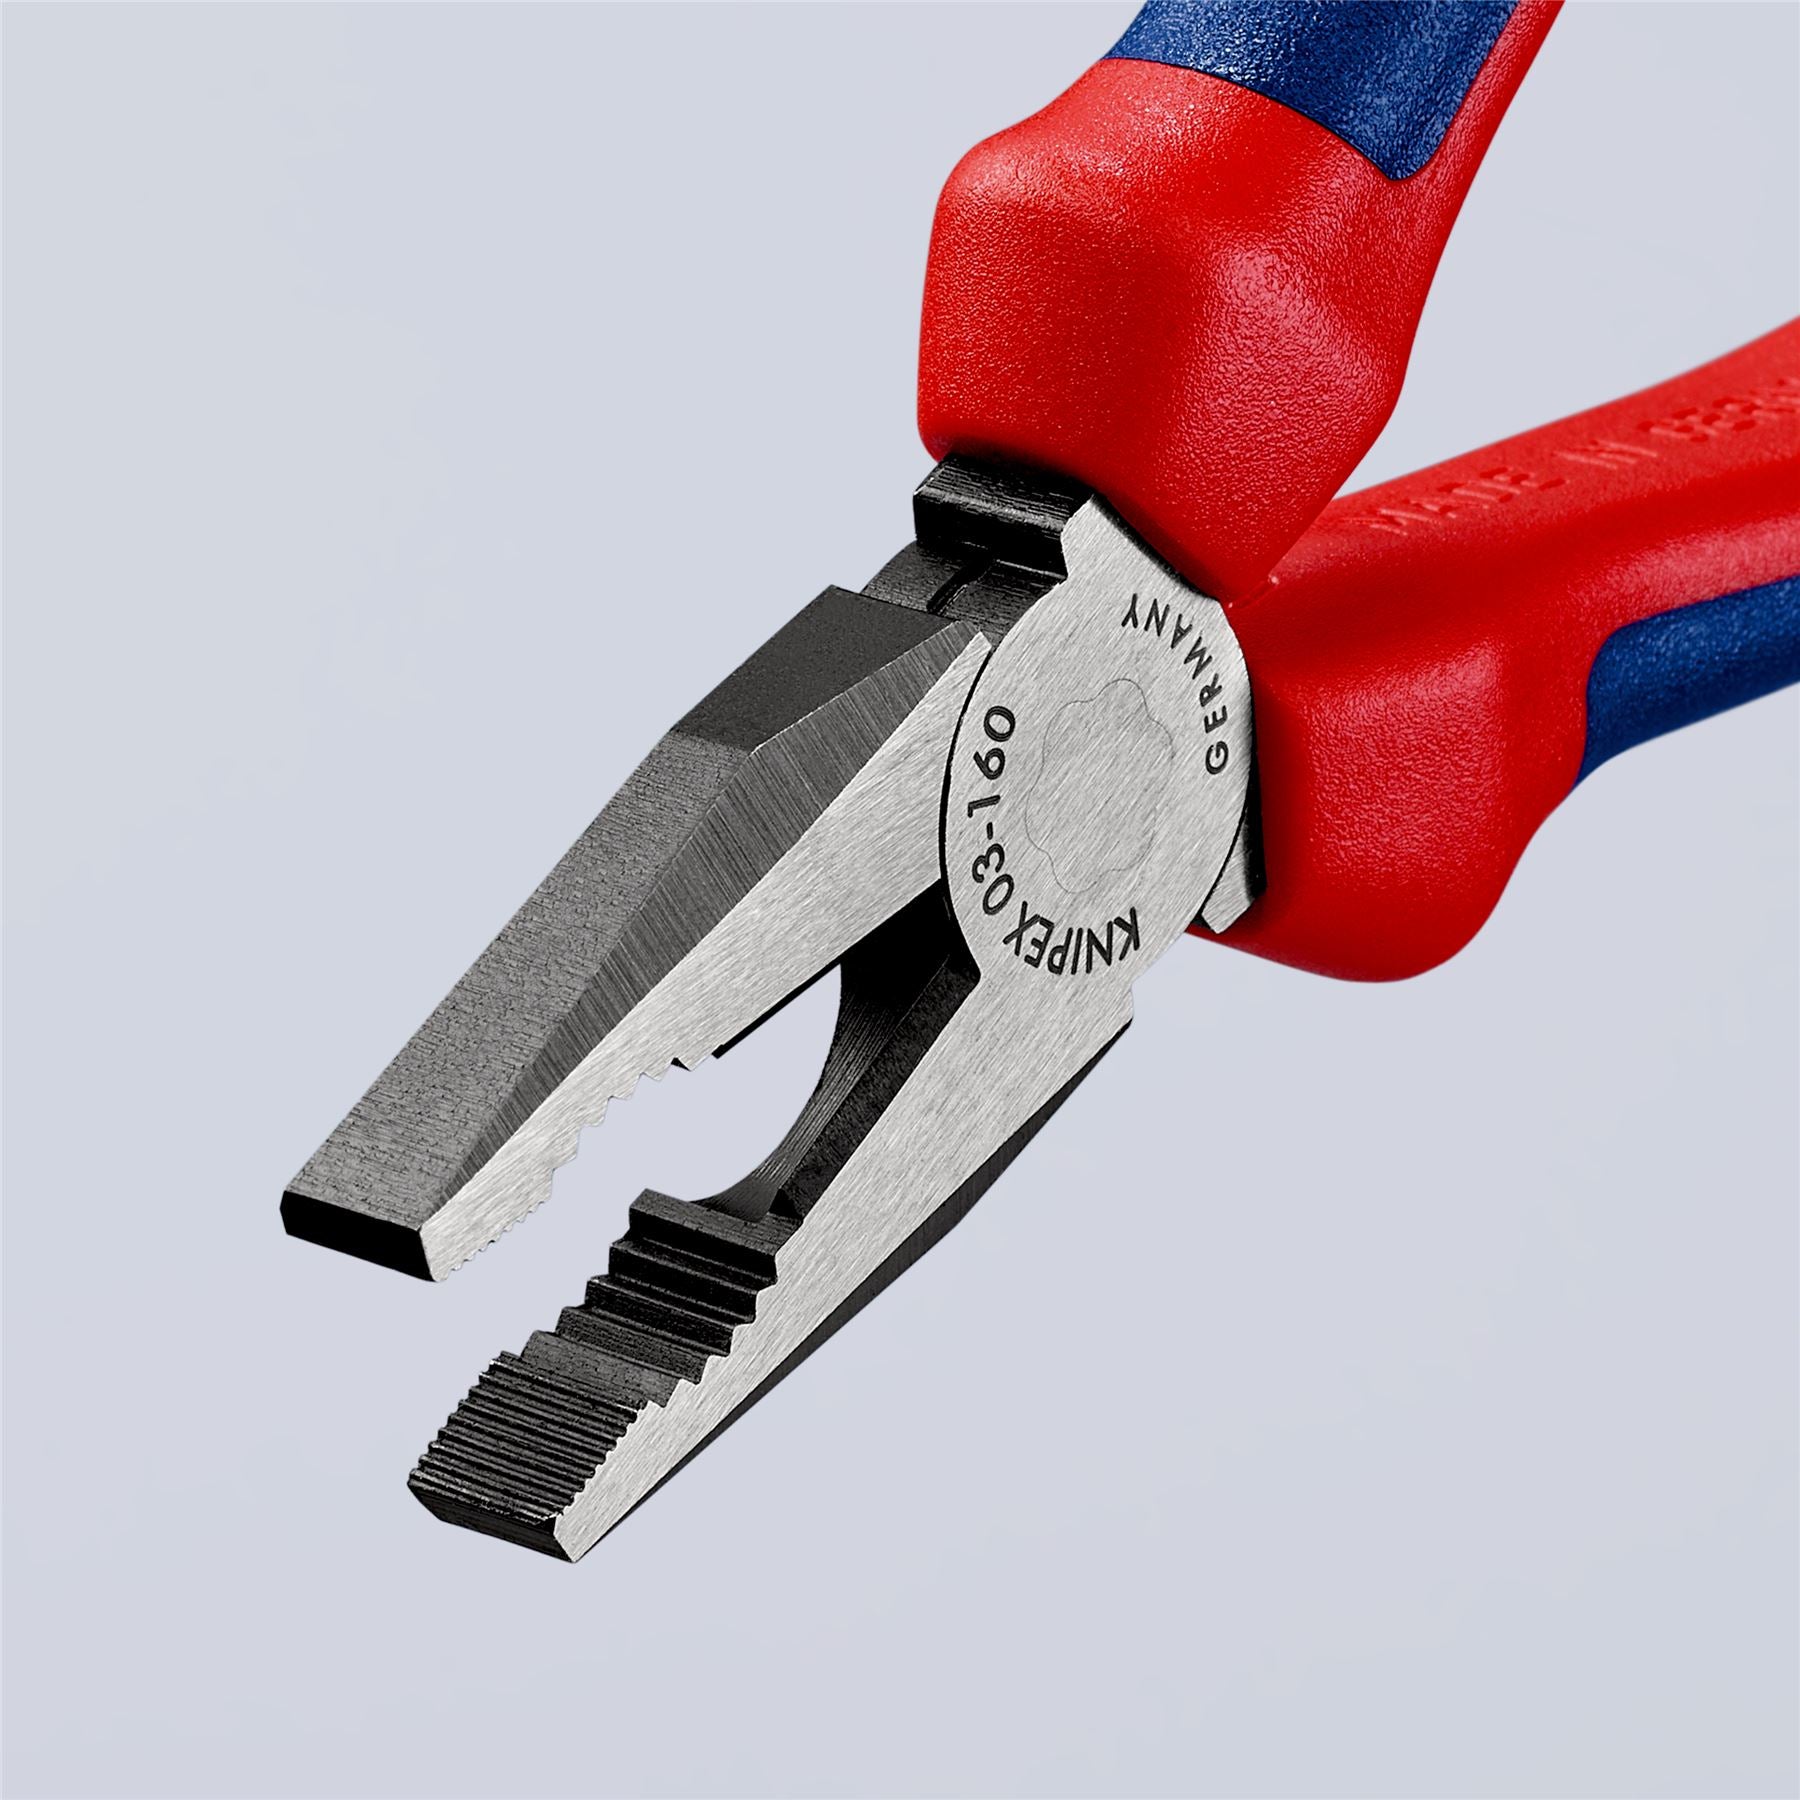 KNIPEX Combination Pliers 160mm Multi Component Grips 03 02 160 SB